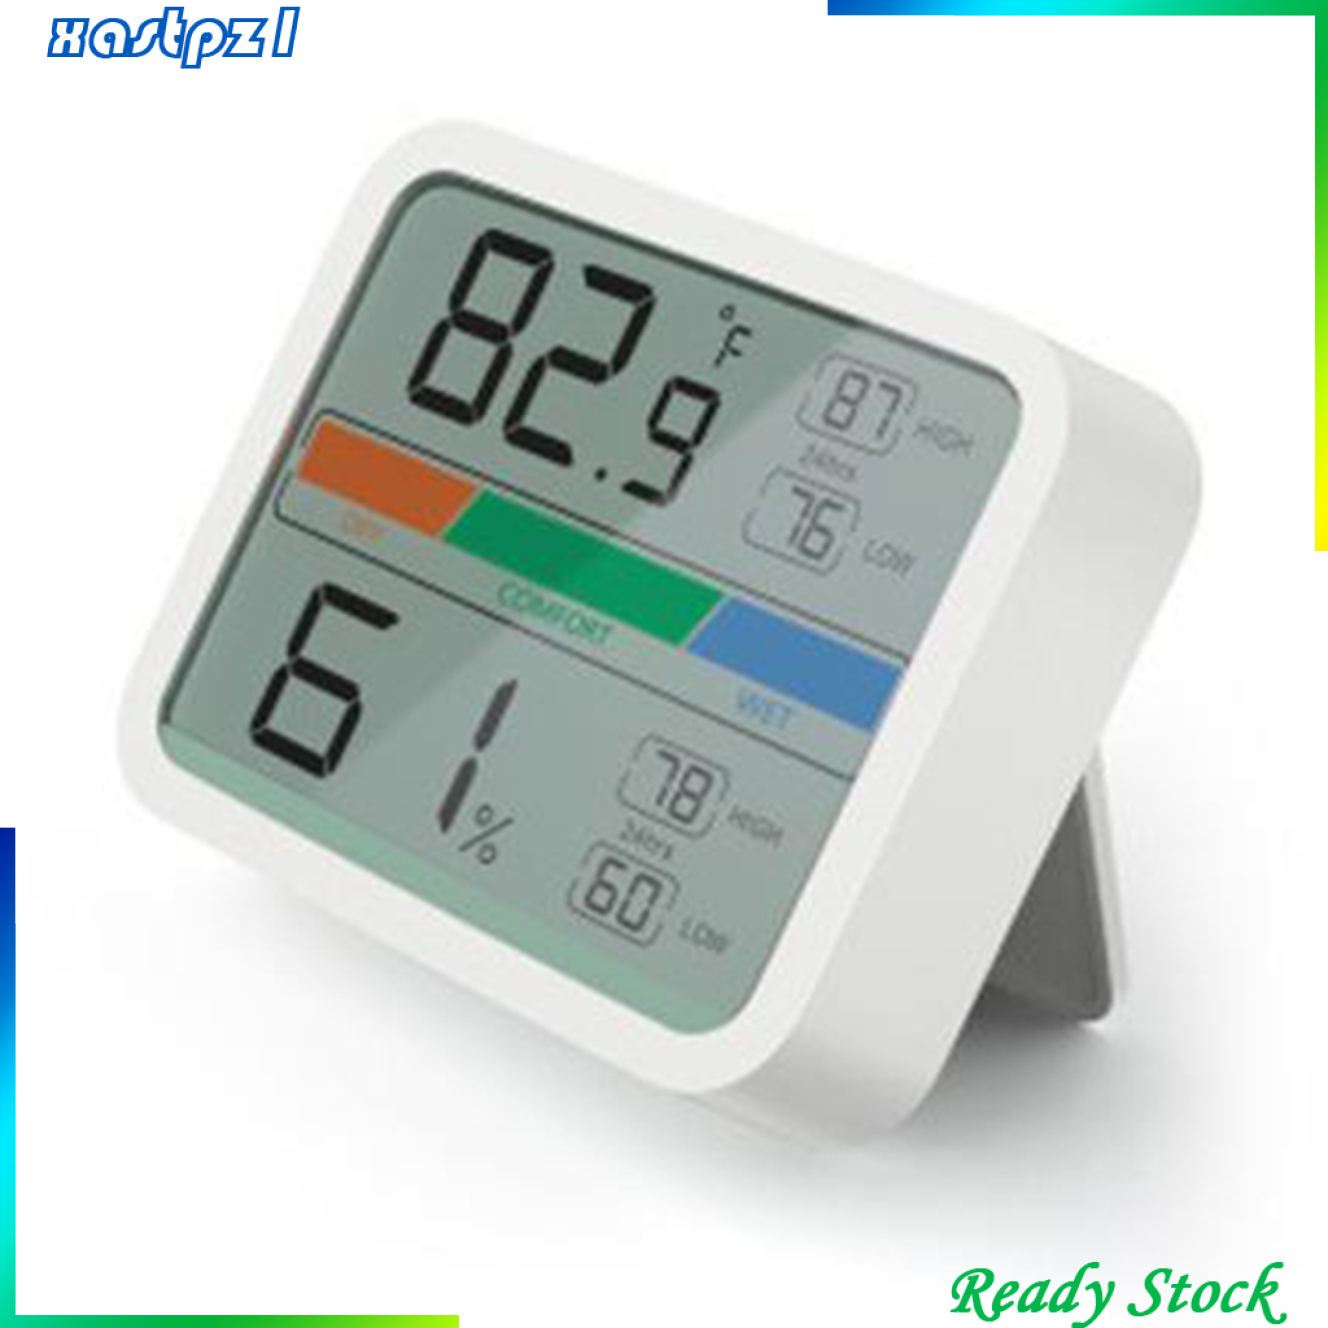 [Ready Stock]Digital LCD Thermometer Hygrometer Humidity Temperature Meter for Basement